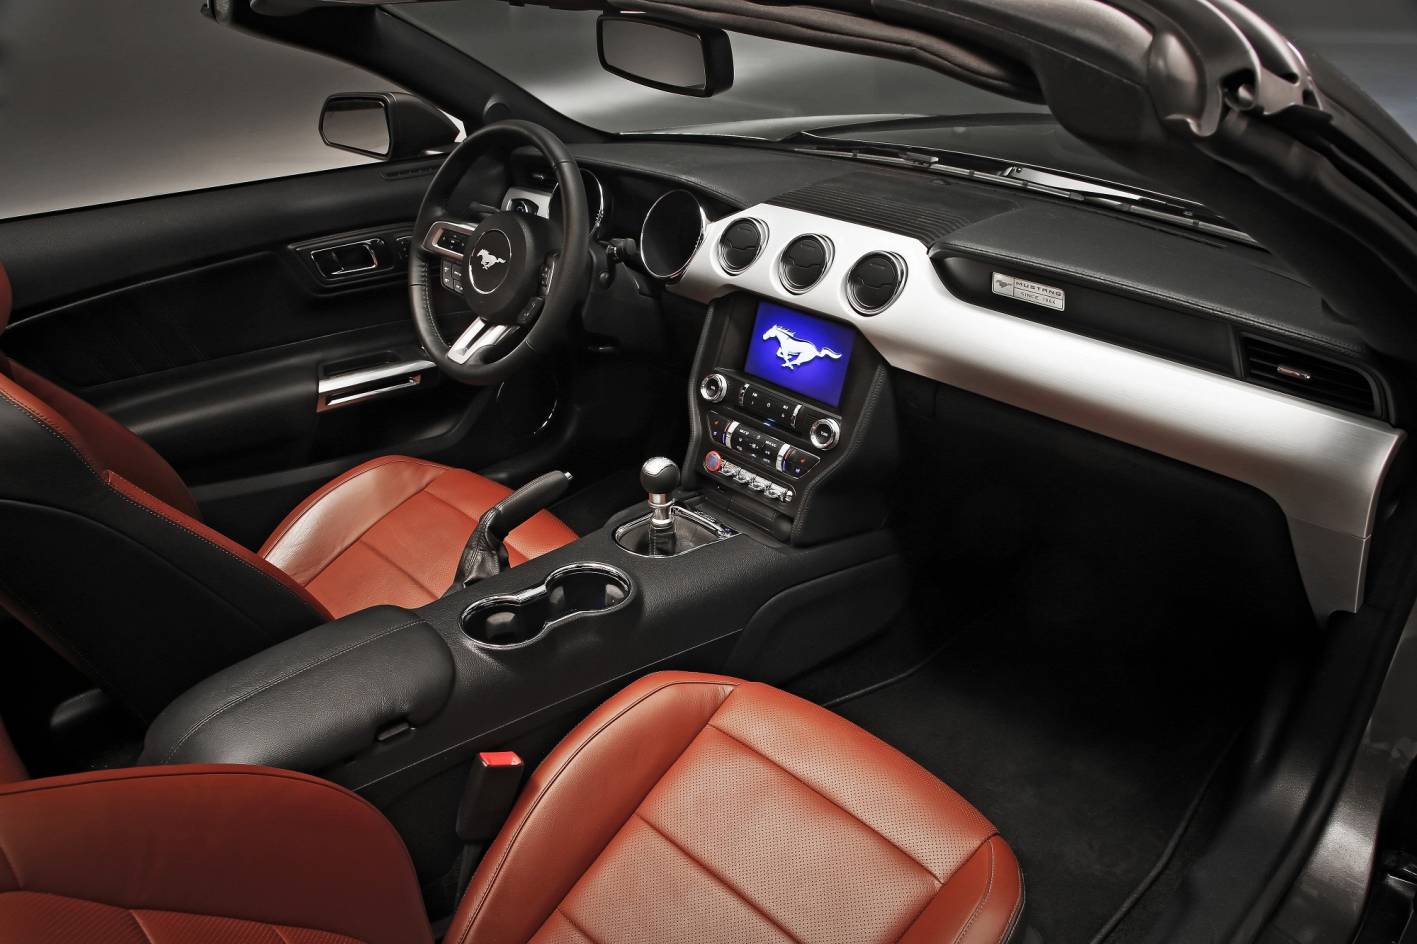 2015 Ford Mustang Gt Convertible Interior Forcegt Com